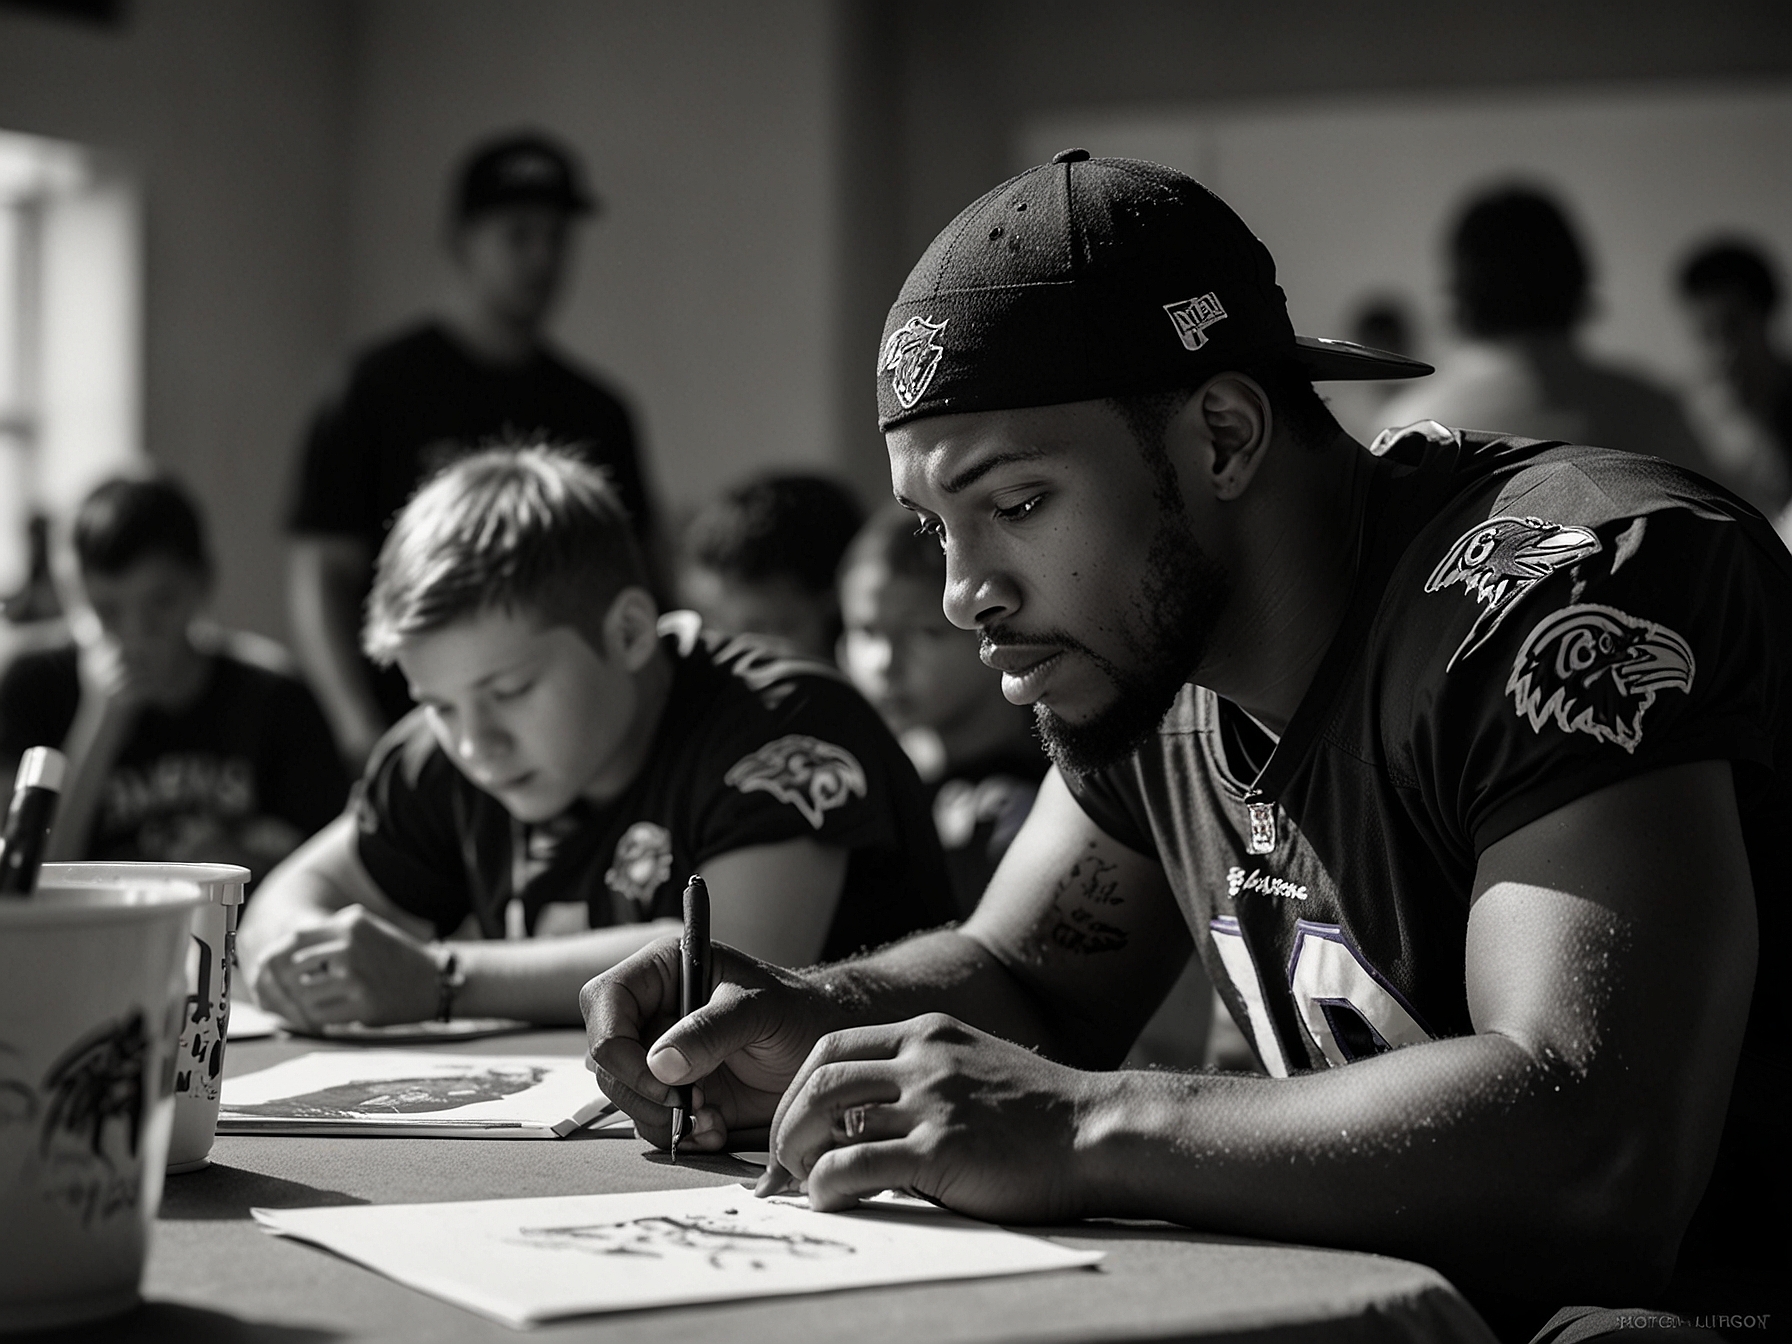 Ravens players interact with young fans during an autograph session at one of the open training camp practices, highlighting the team's commitment to connecting with the community and enhancing fan experiences.